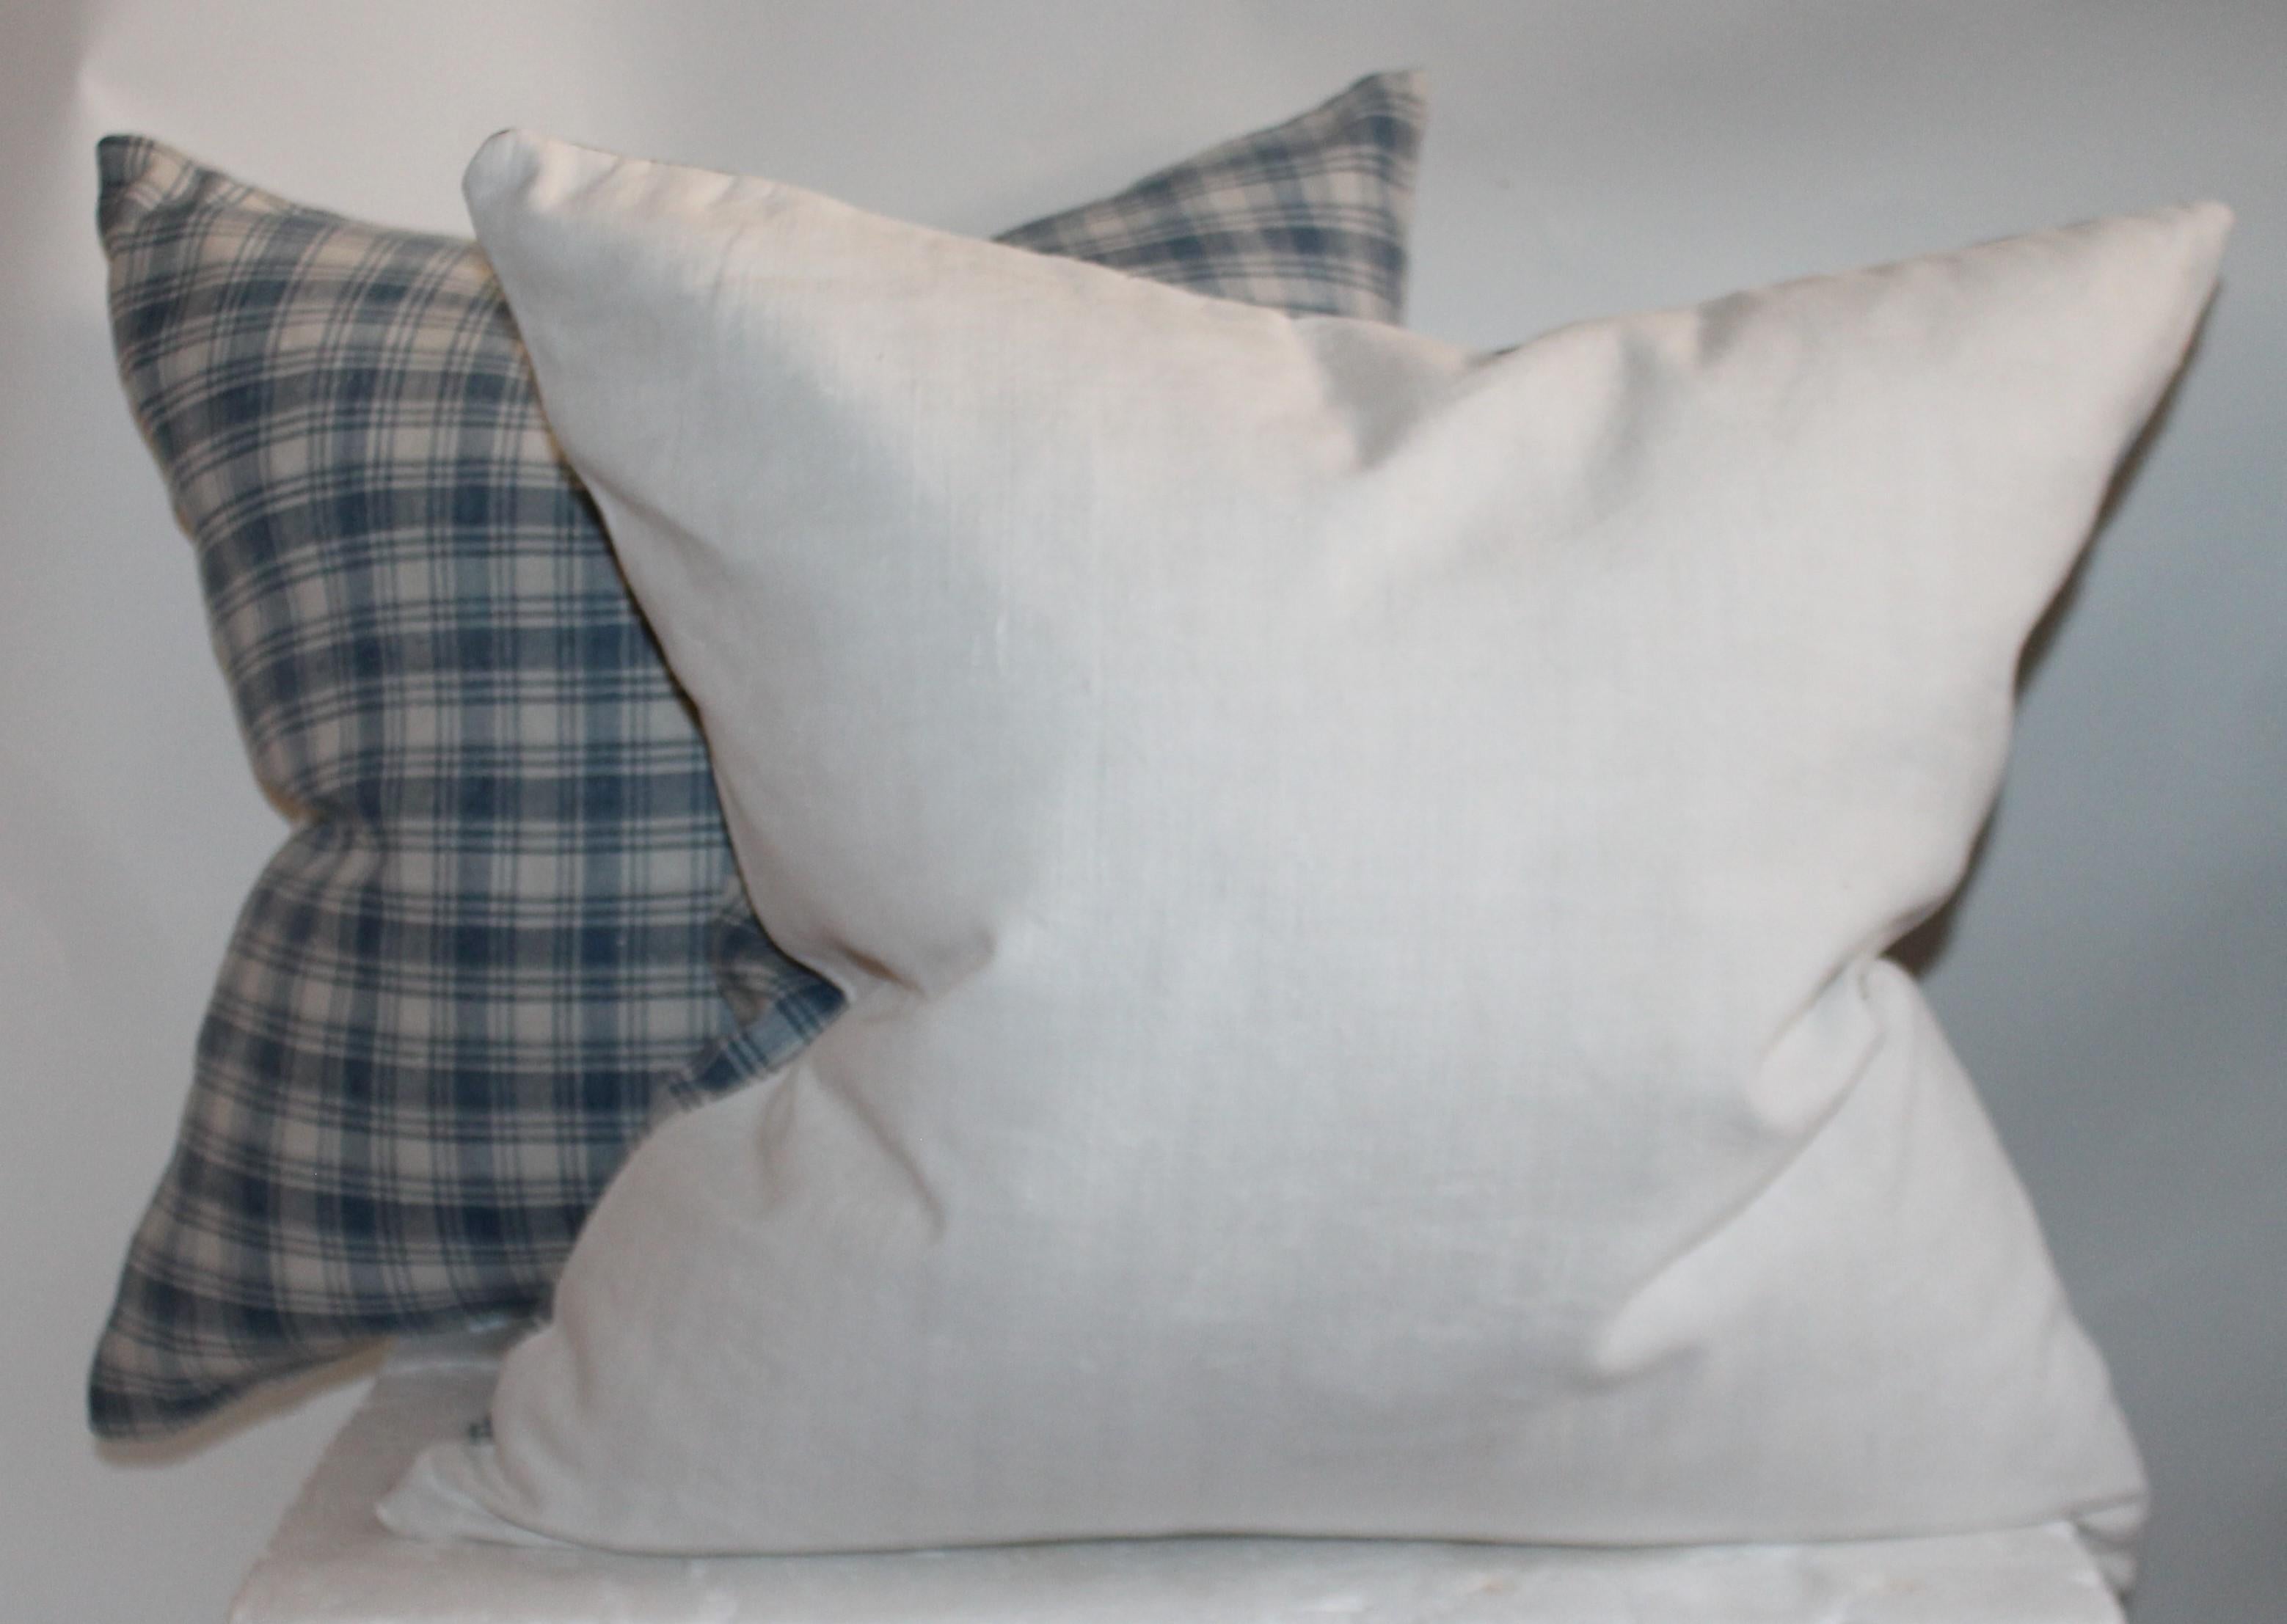 These fine early blue and white homespun cotton linen pillows are in fine condition. Sold as a pair.